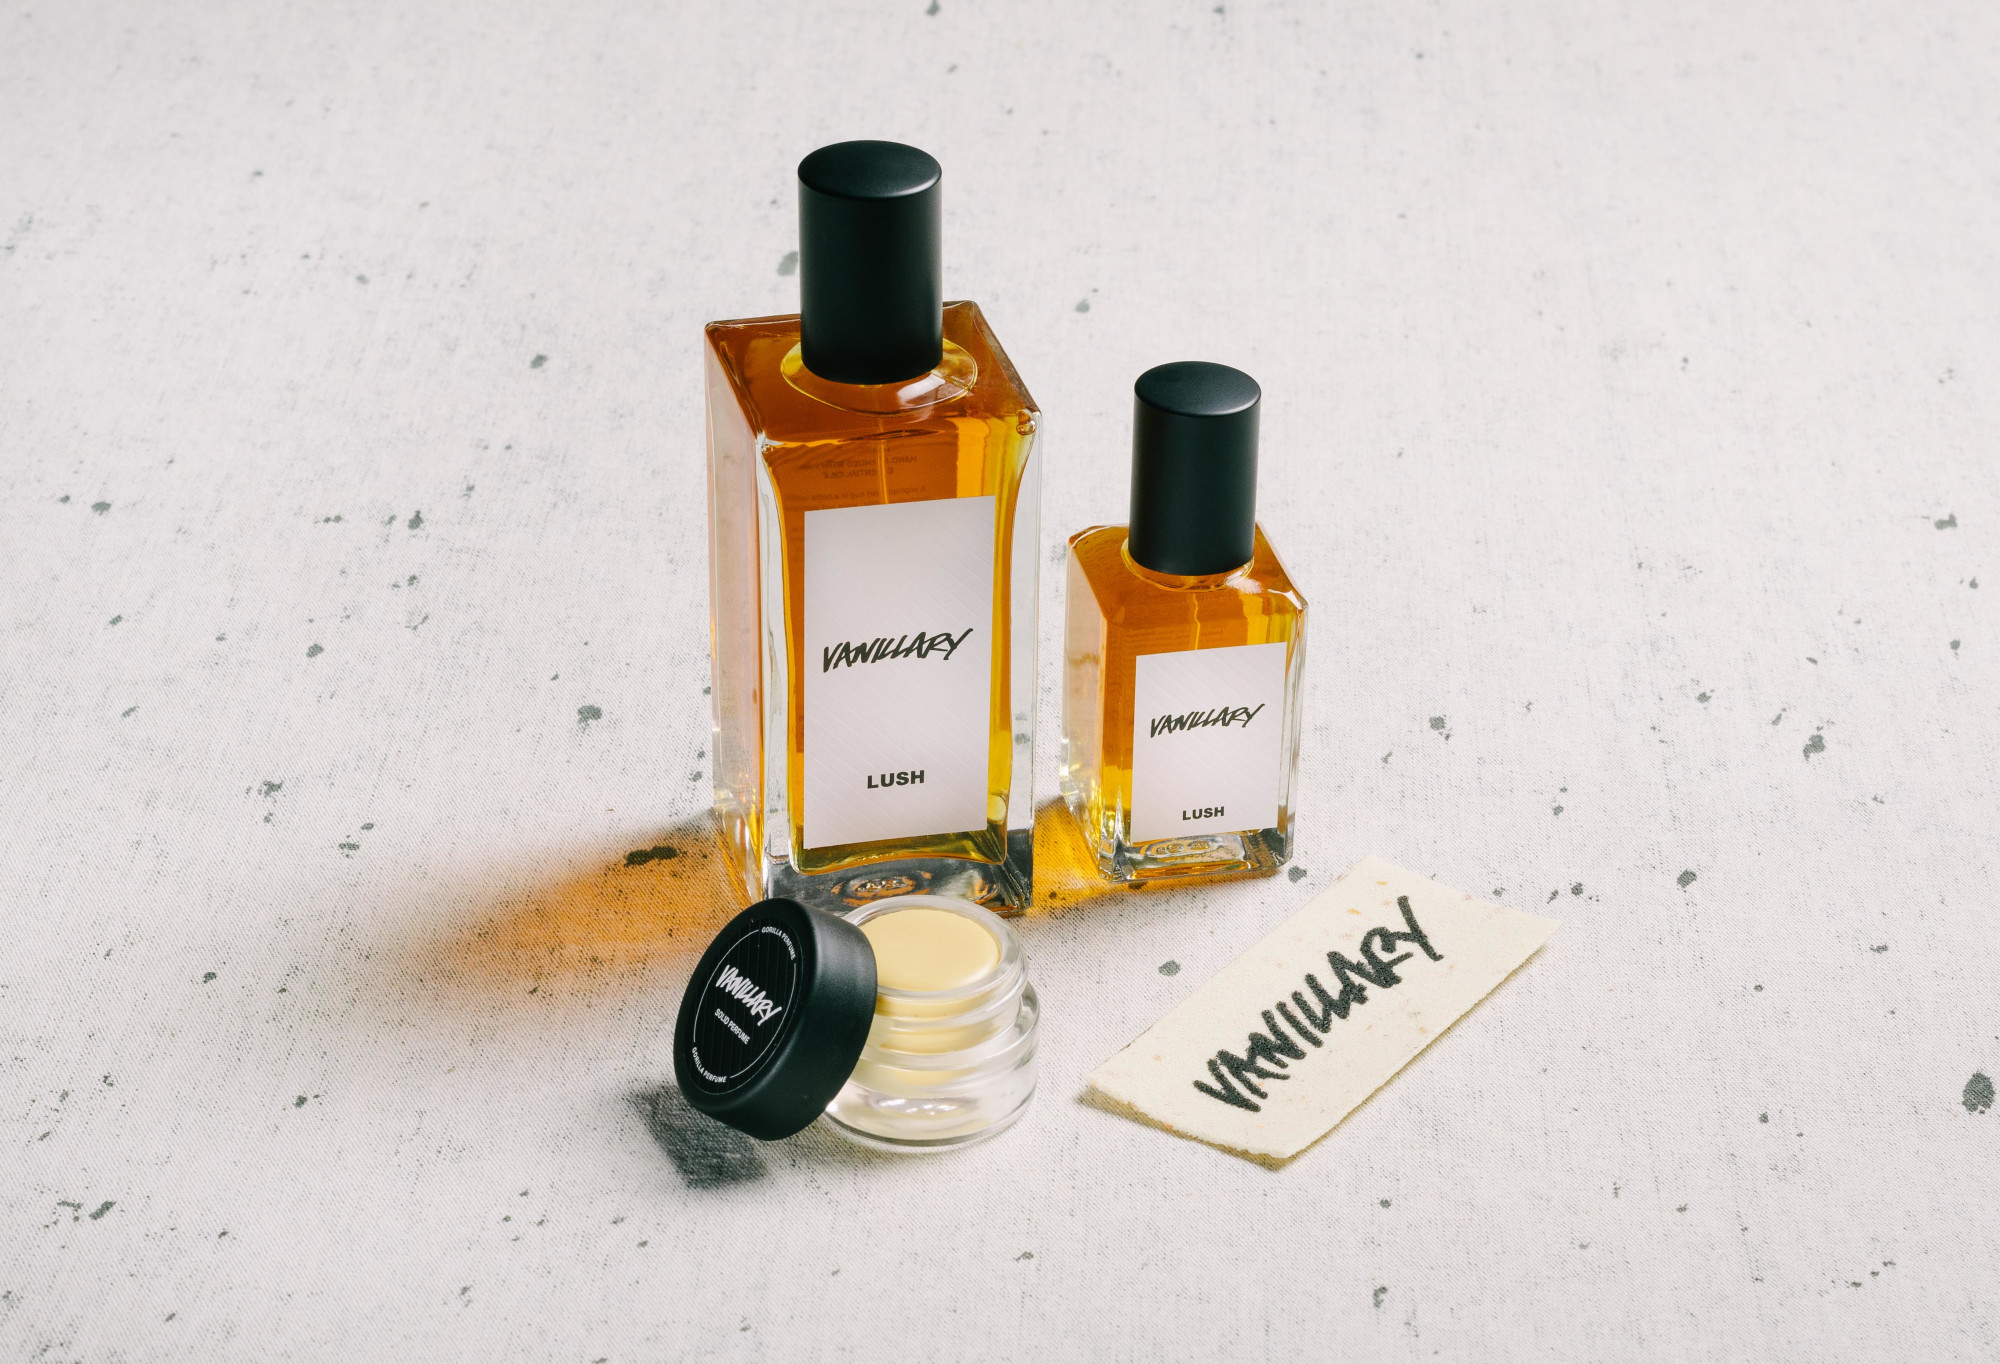 The whole Vanillary fragrance collection is displayed on a white surface, flecked with grey.